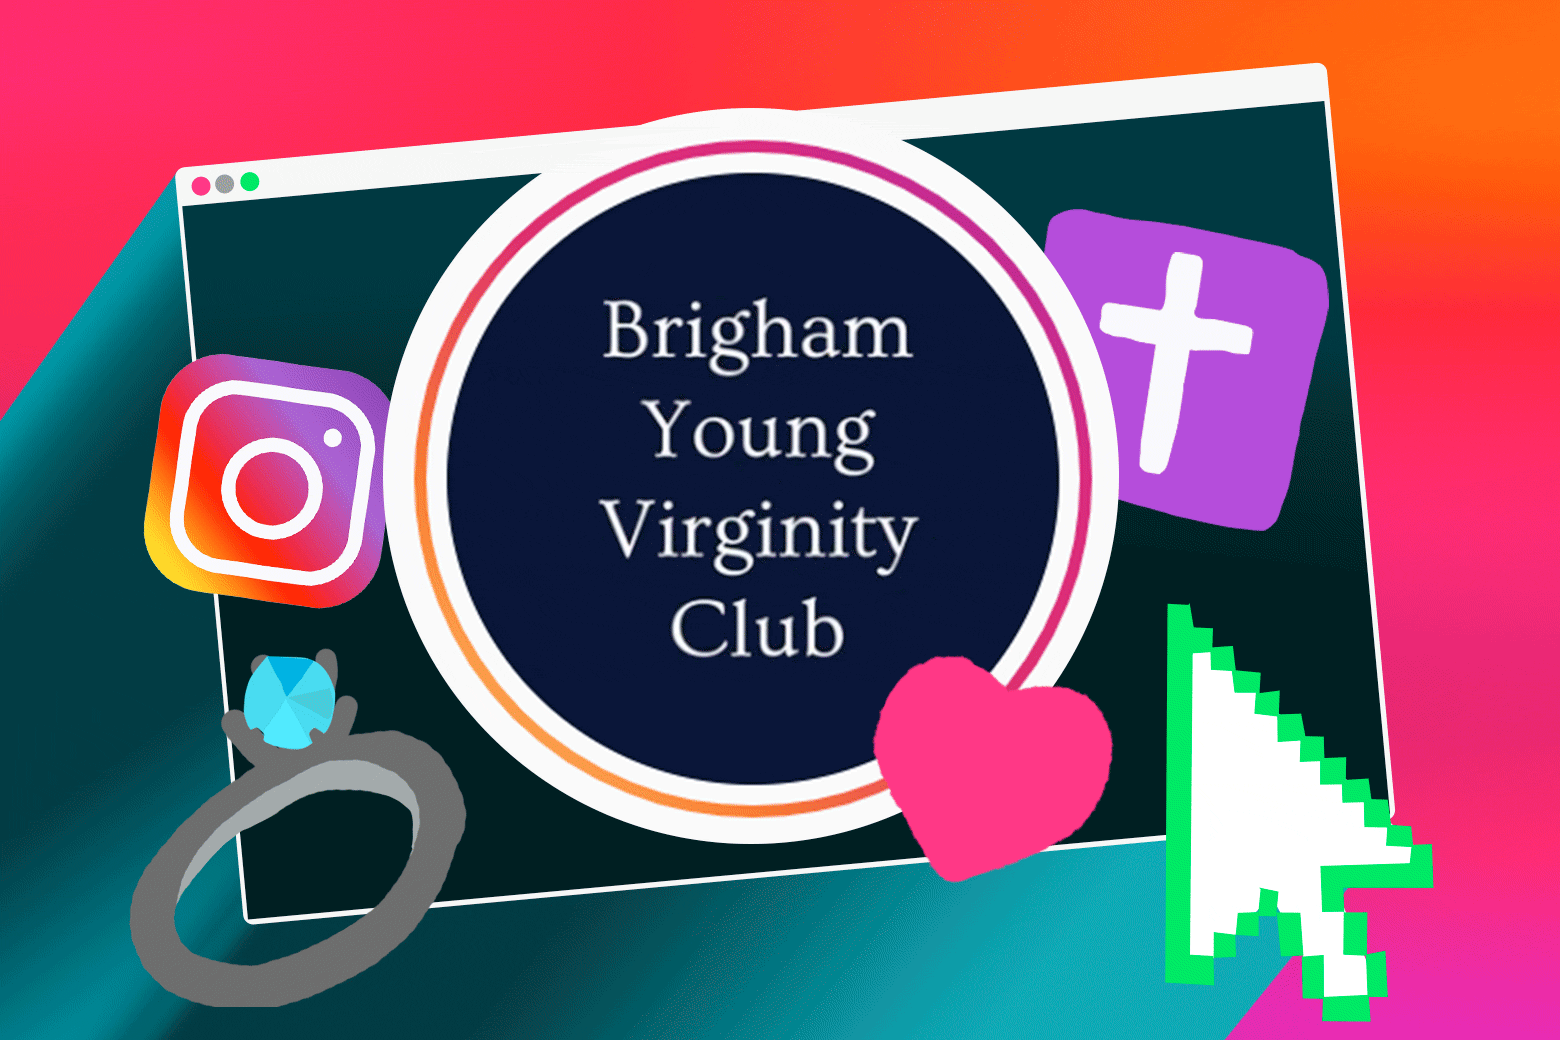 Samantha Saint Sex Gif Missionary - Brigham Young University Virginity Club: Who's behind the popular Instagram?